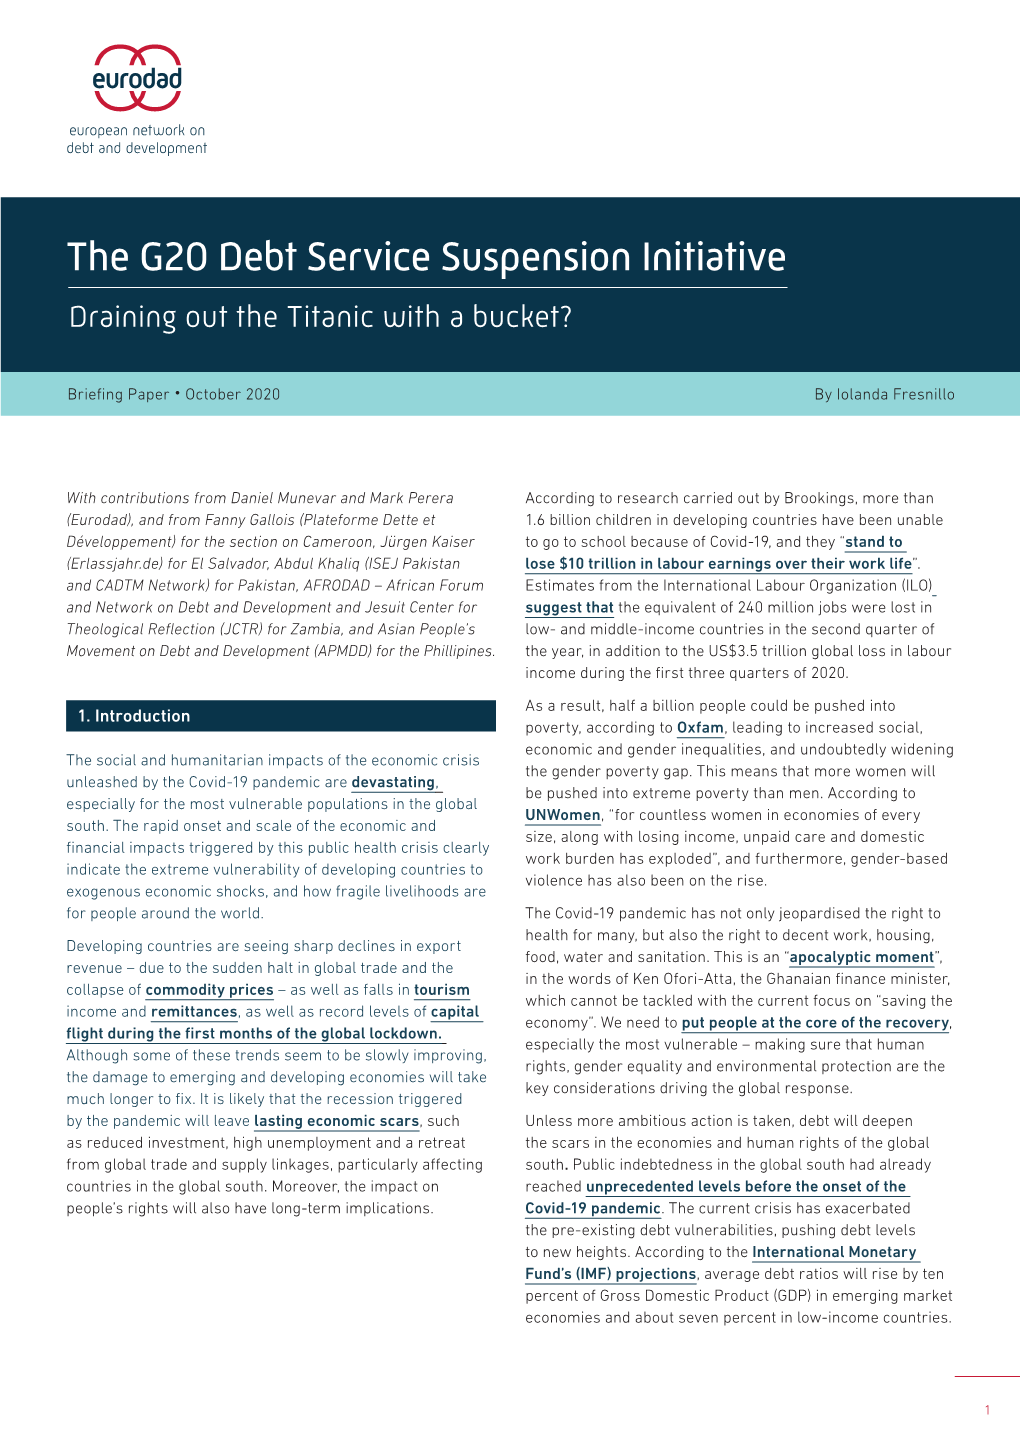 The G20 Debt Service Suspension Initiative Draining out the Titanic with a Bucket?